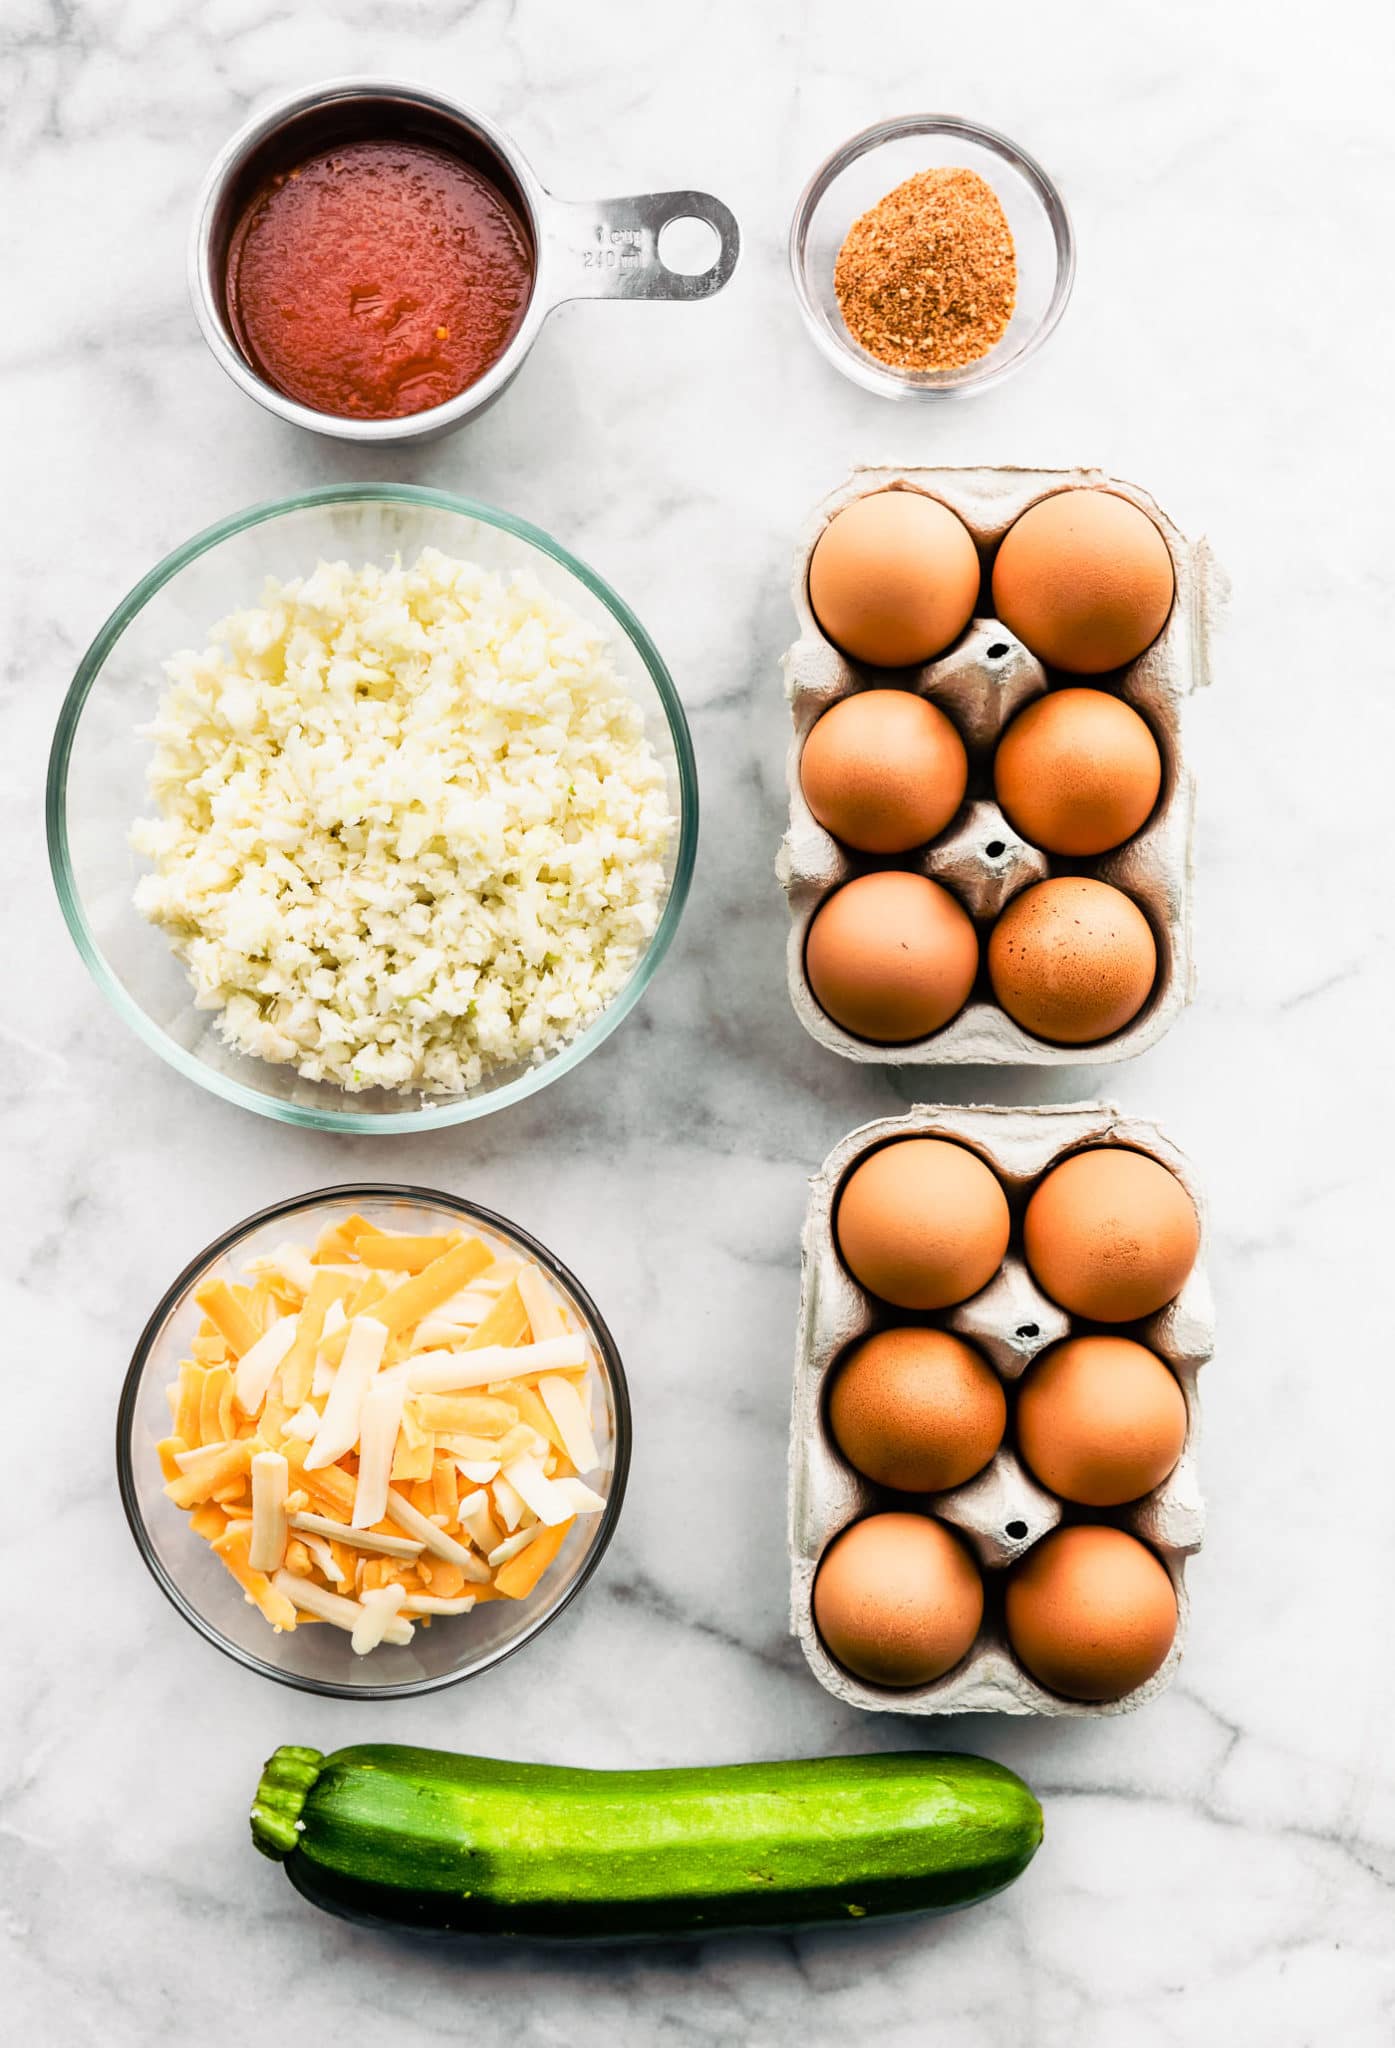 overhead image of two cartons of 6 eggs, a glass bowl with spices, a measuring cup holding enchilada sauce, a glass bowl holding riced cauliflower, a glass bowl holding shredded cheese, and a whole zucchini needed to make tex-mex egg and cauliflower casserole